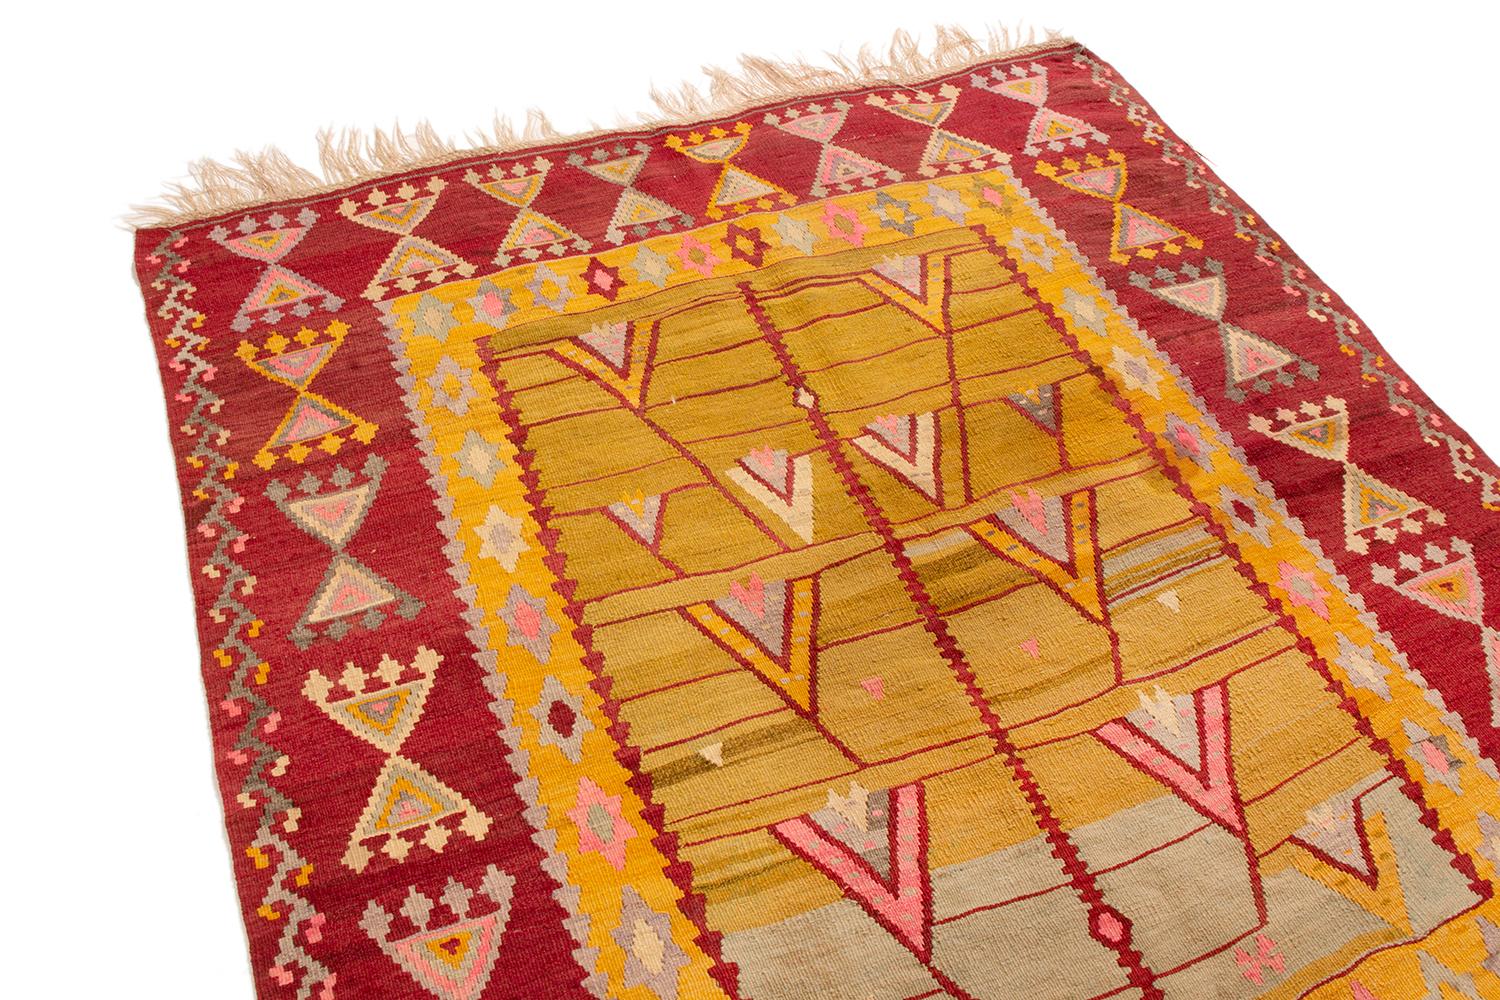 Originating from Turkey in the 1900s, this antique transitional Kilim rug features seldom-seen Turkish symbolism throughout its wrapping border. Flat-woven in high quality, durable wool, the pictorial field design strongly resembles a natural scene